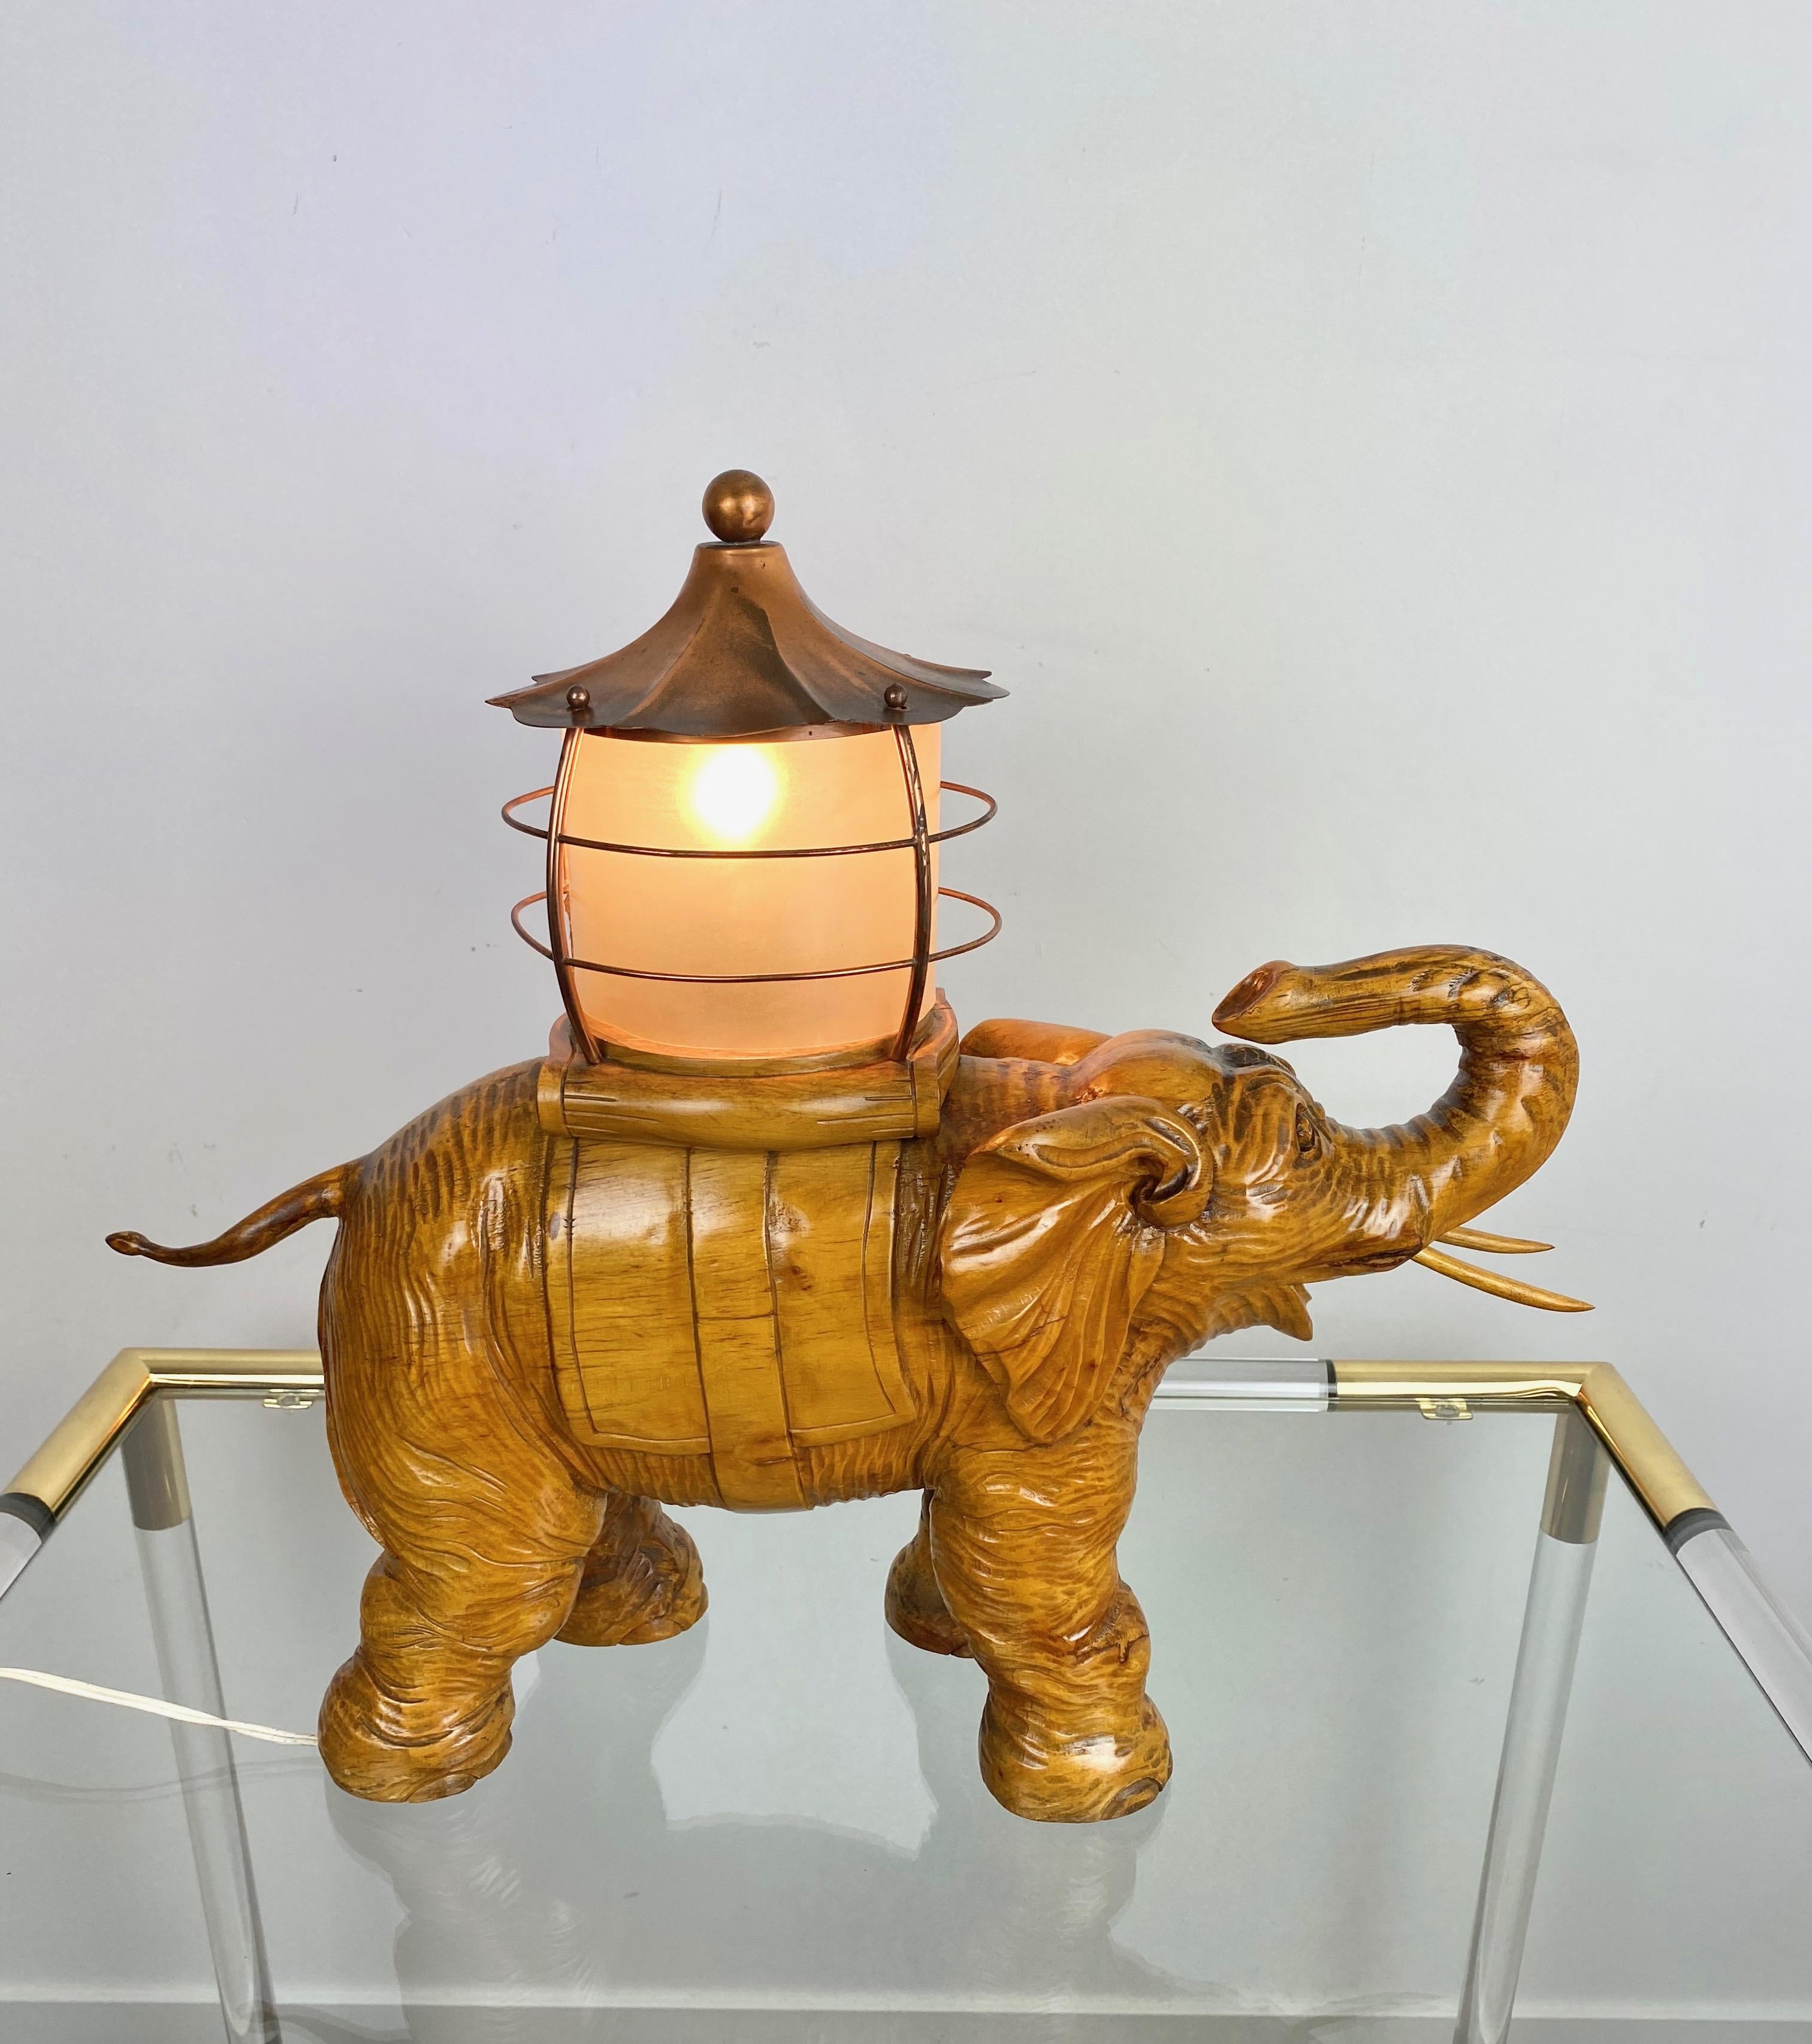 Not many Aldo Tura pieces can be compared to this unique table lamp, hand carved from a single piece of wood. Aldo Tura lamps were done in small editions and the detail and level of sophistication in carving on this particular lamp would be